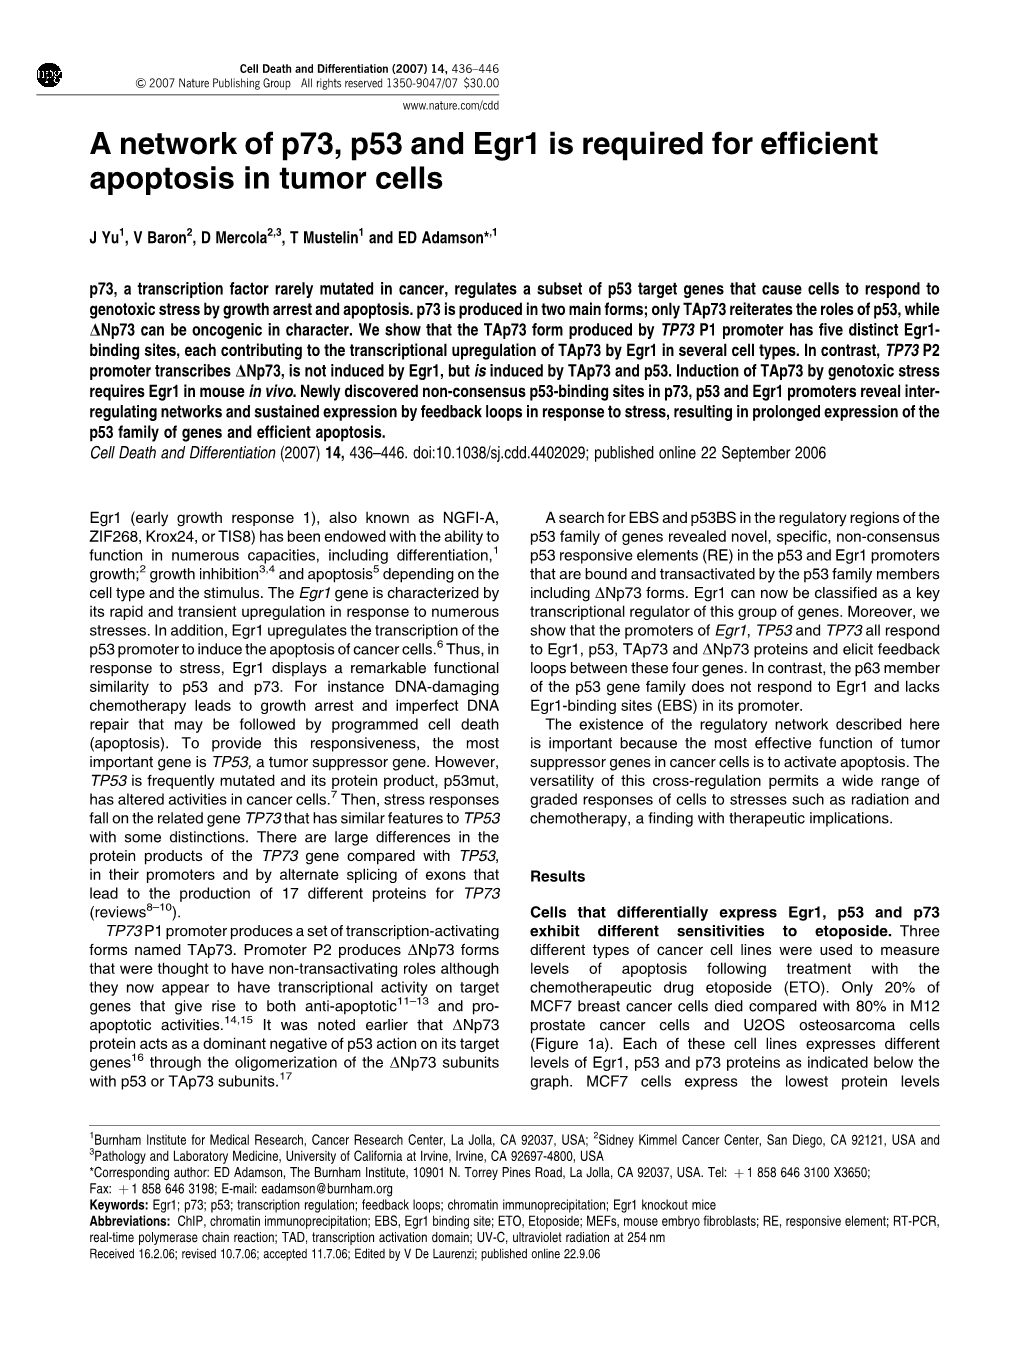 A Network of P73, P53 and Egr1 Is Required for Efficient Apoptosis In